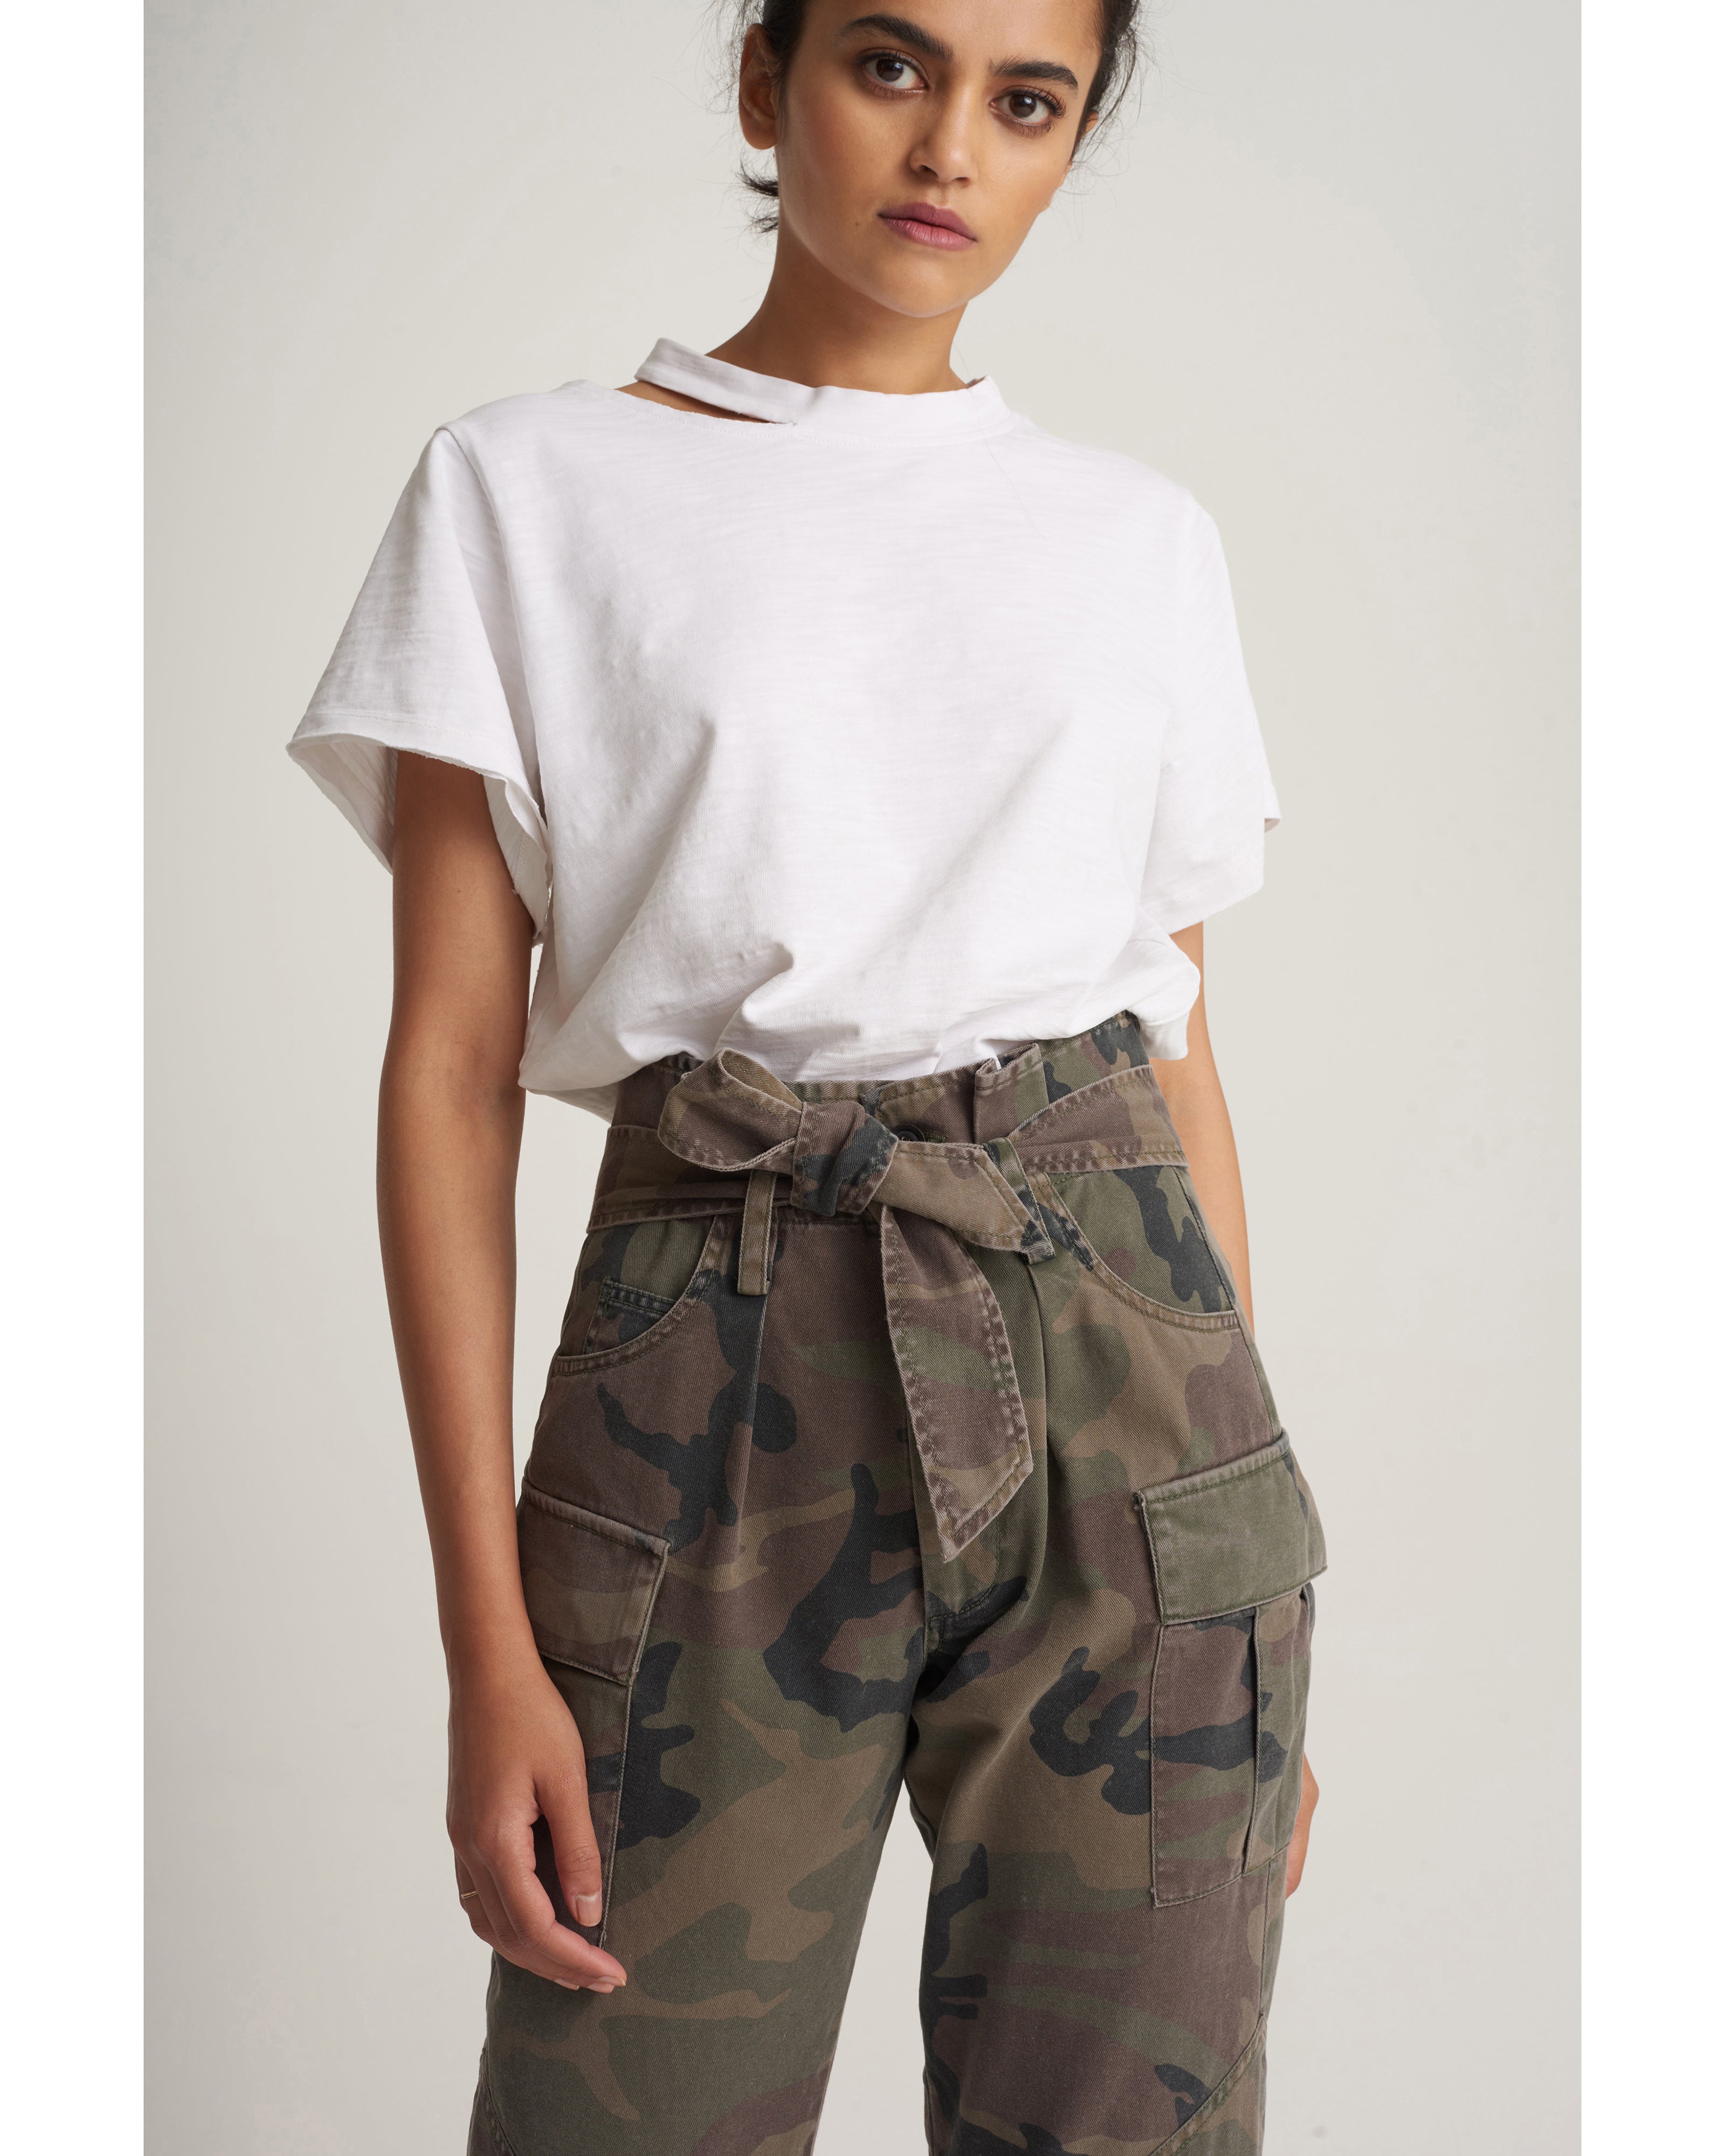 Bryn Paper Bag Vintage Washed Camo Pant in Woodland Camo